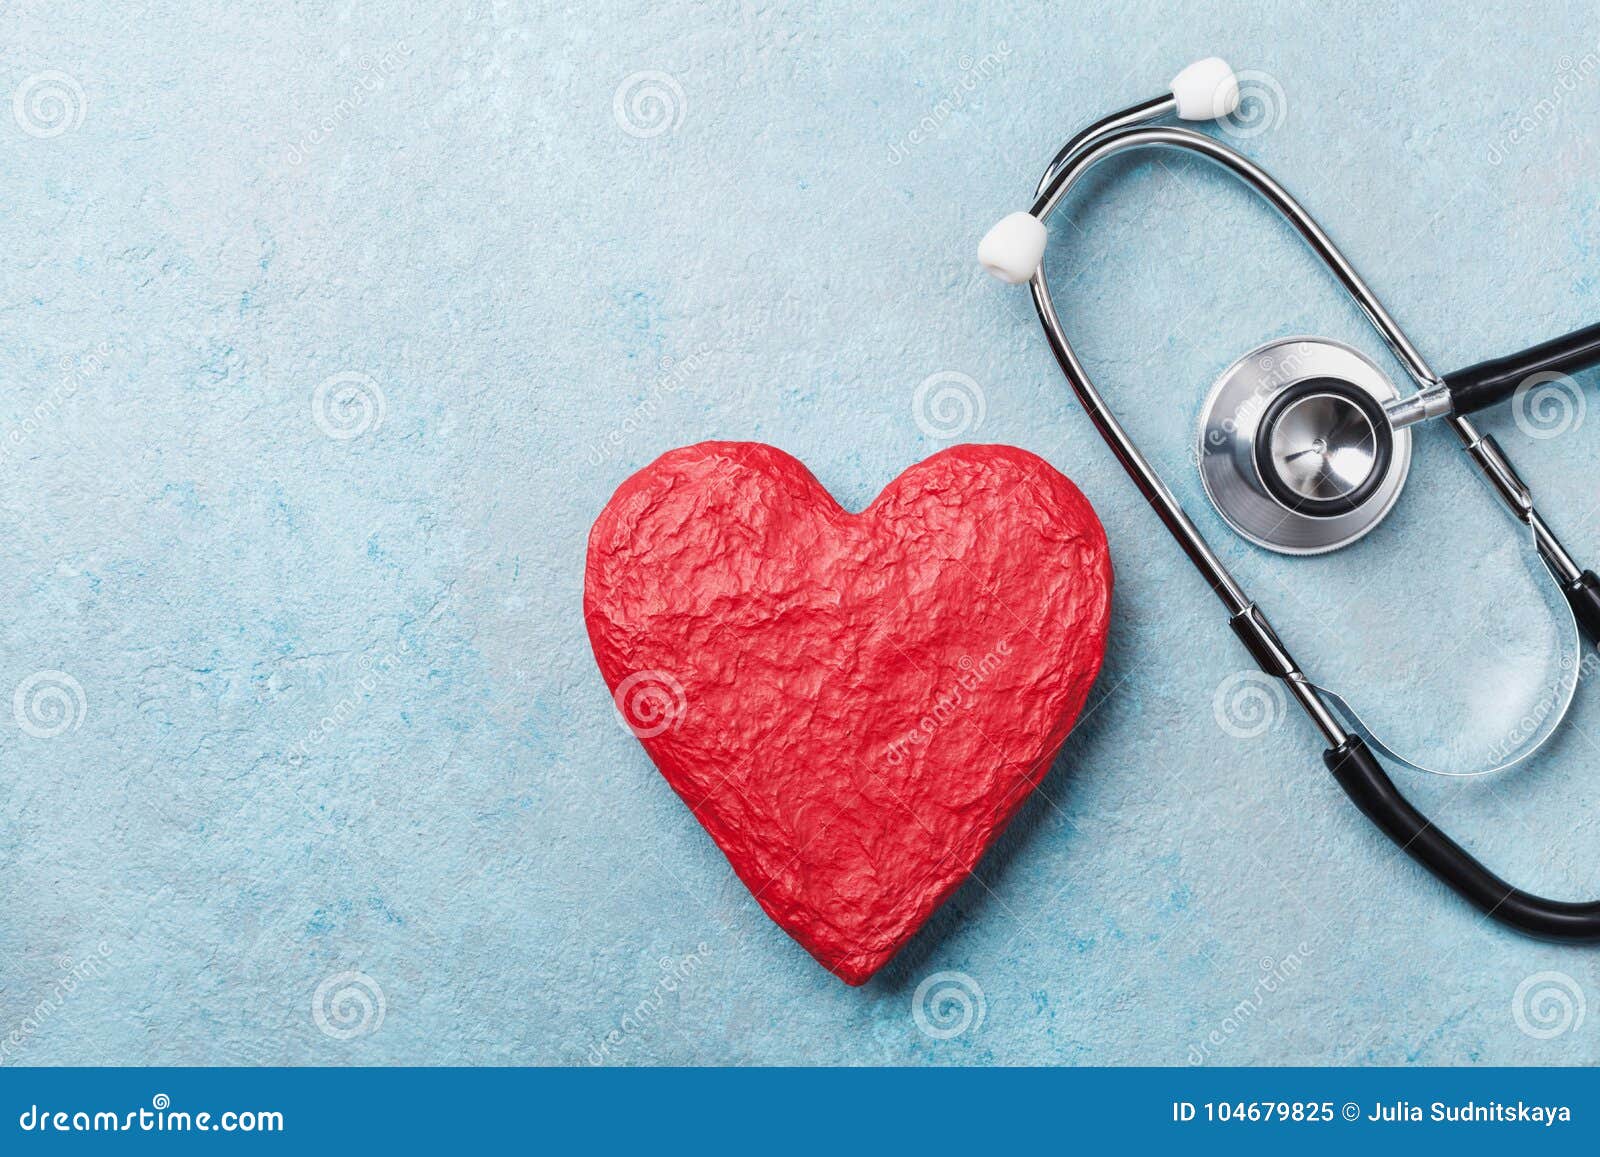 red heart  and medical stethoscope on blue background top view. health care, medicare and cardiology concept.